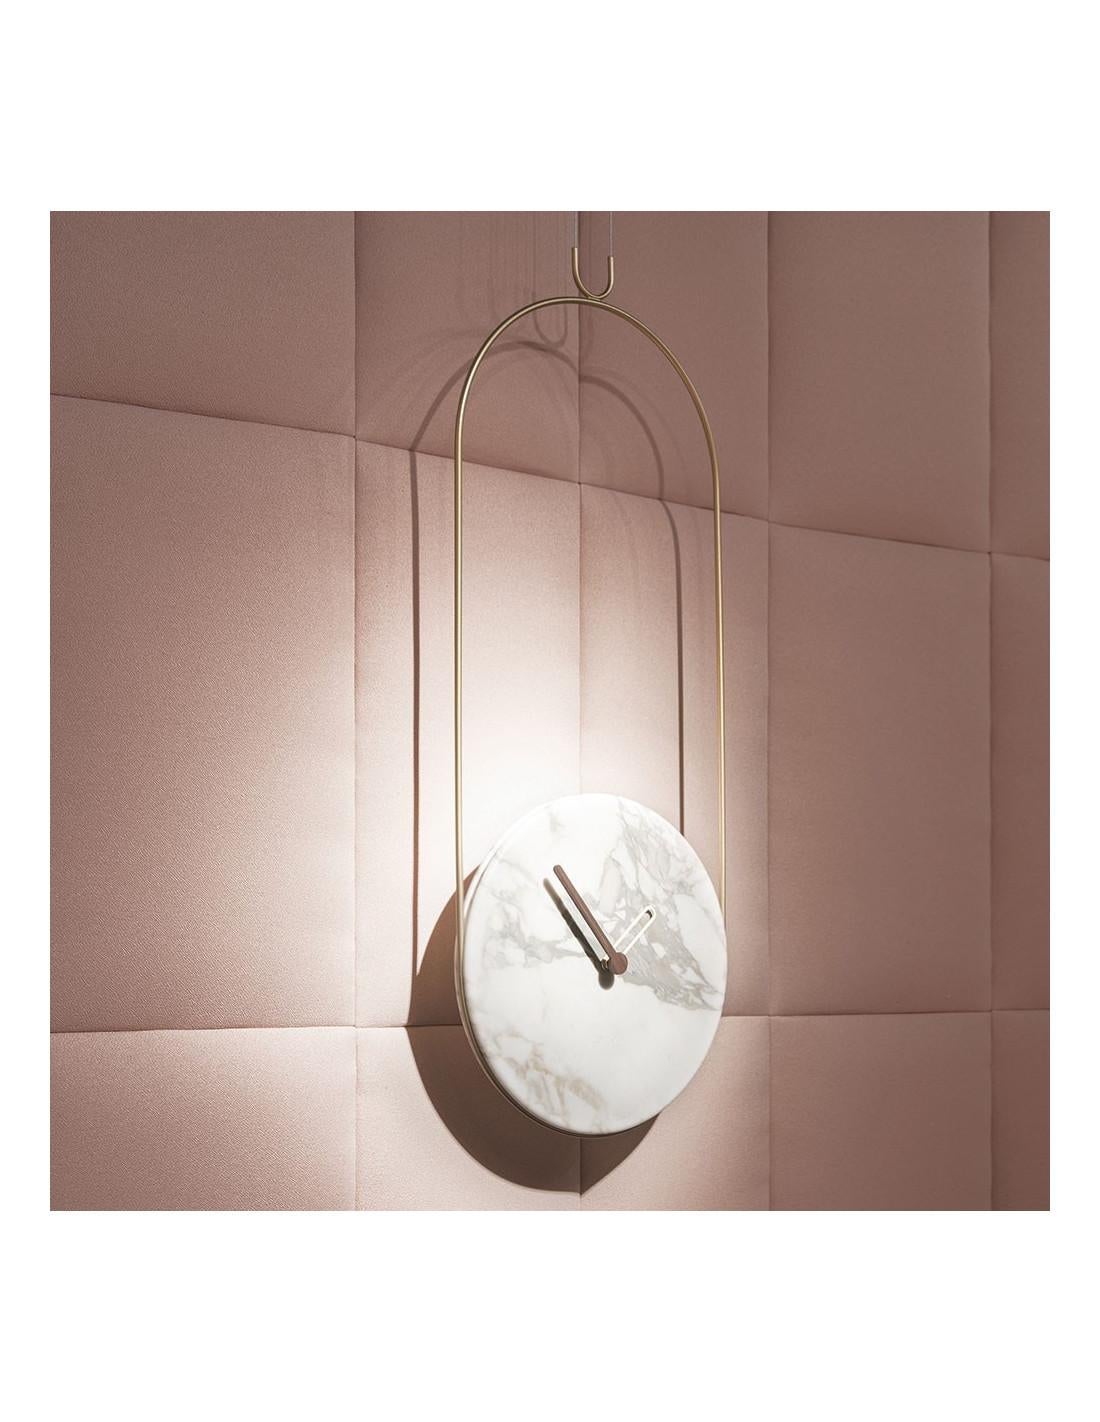 The sophistication of the marble suspended from the curved metal rod finished in brass or black, makes the Colgante Marble wall clock a jewel.
Case: black or brass finish metal.
Dish: Emperador marble, Calacatta marble, Sahara Noir marble.
Rim: